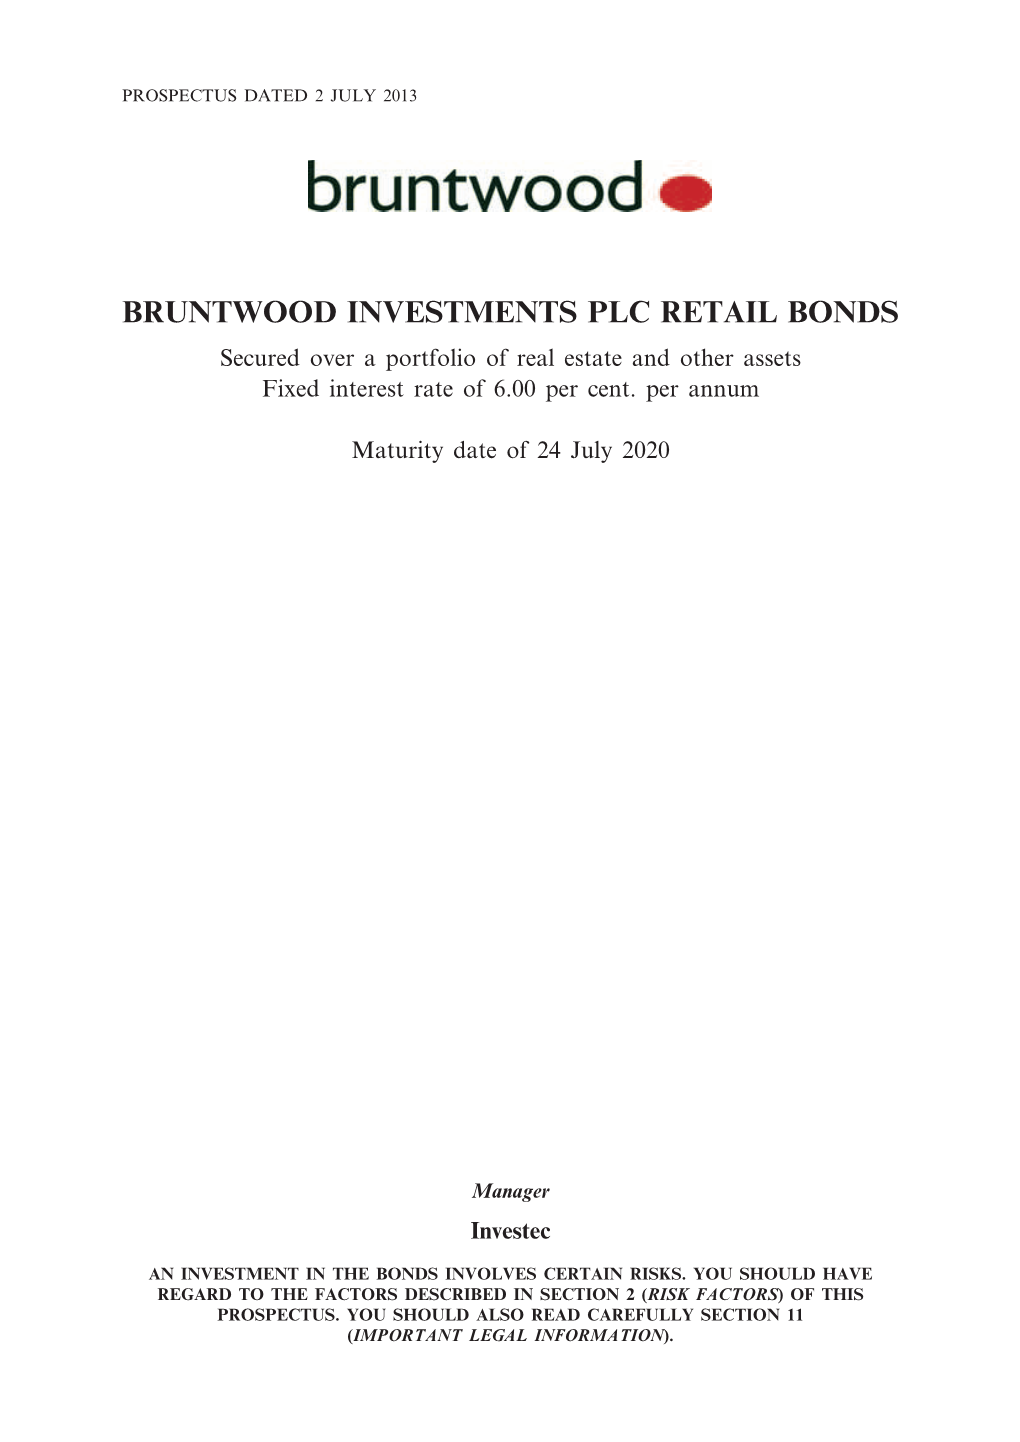 BRUNTWOOD INVESTMENTS PLC RETAIL BONDS Secured Over a Portfolio of Real Estate and Other Assets Fixed Interest Rate of 6.00 Per Cent